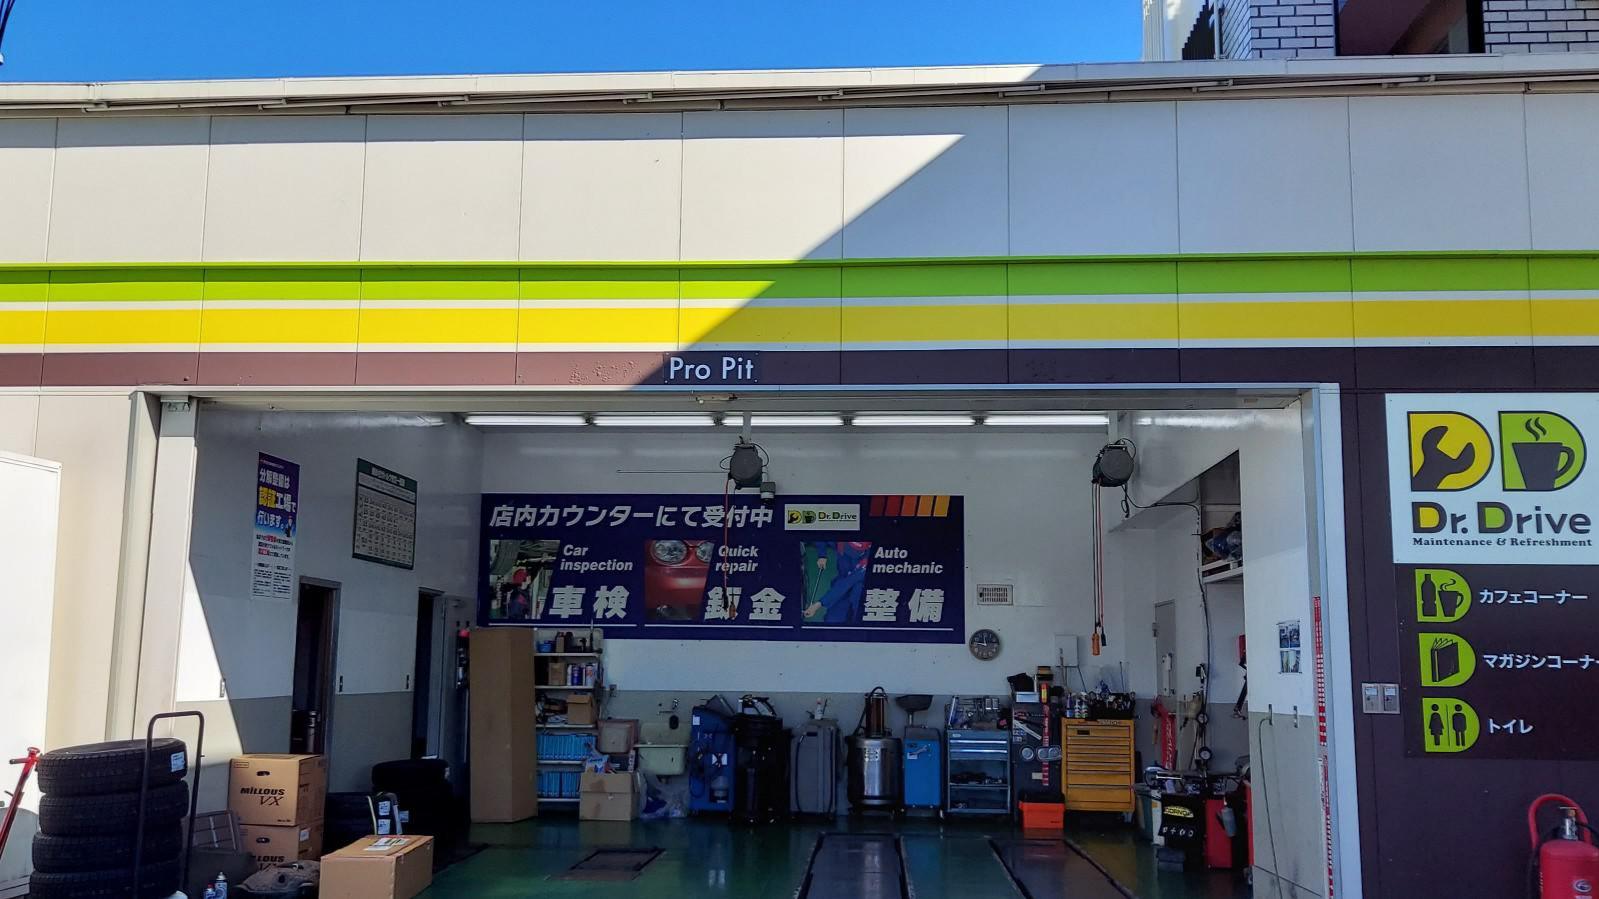 Images ENEOS Dr.Driveセルフ川越店(ENEOSフロンティア)